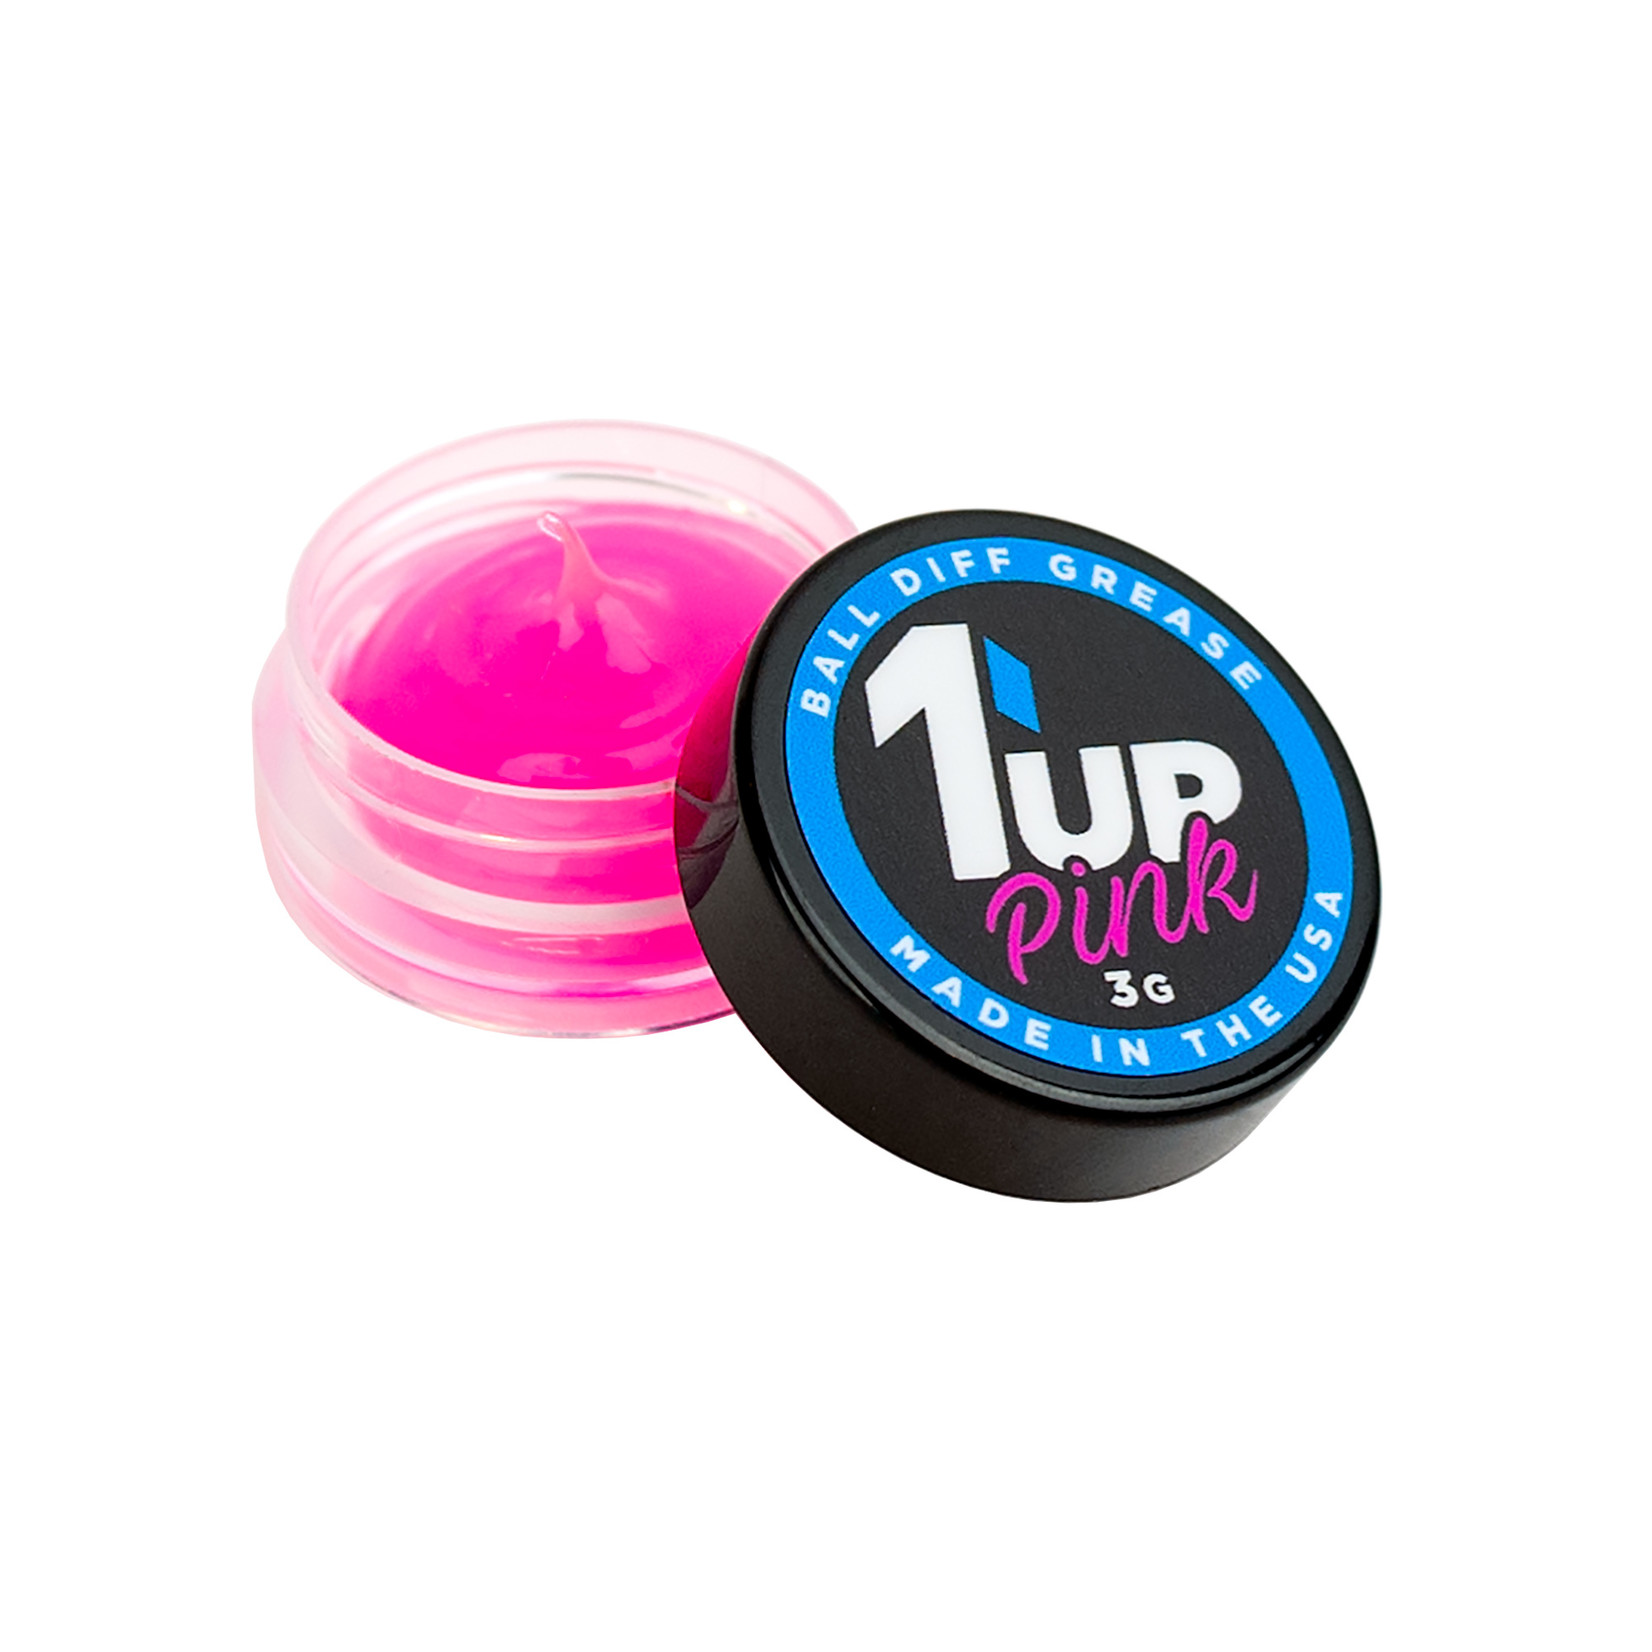 1UP Racing Pink, Ball Differential Grease, 3g